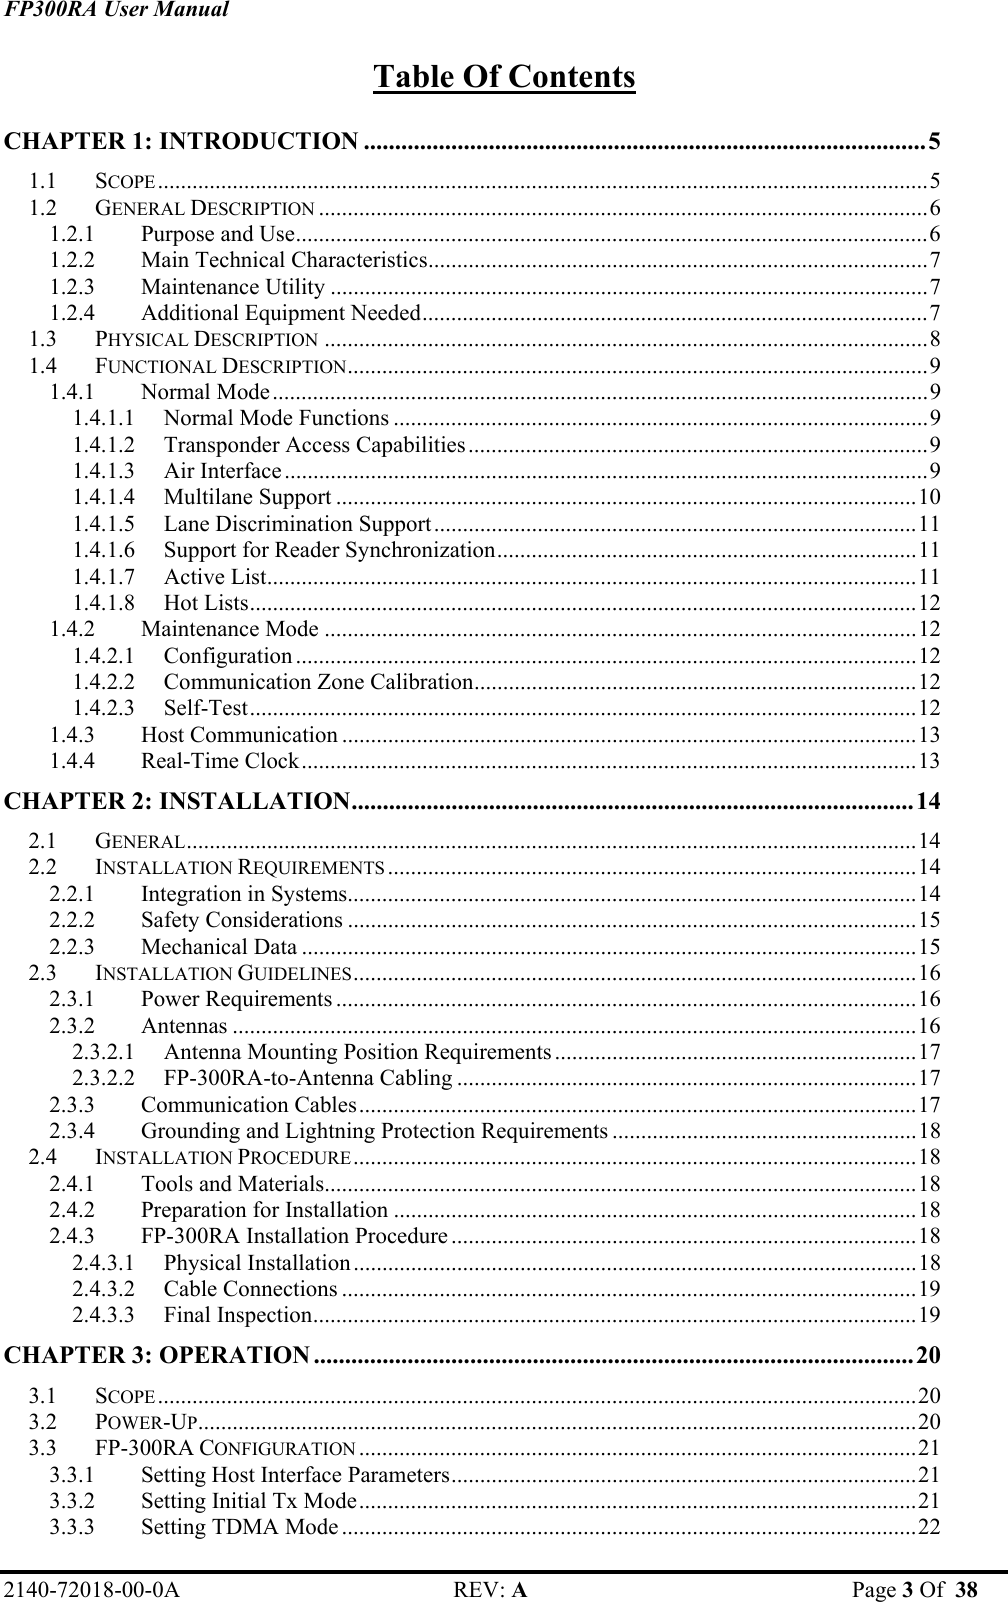 FP300RA User Manual 2140-72018-00-0A REV: A  Page 3 Of  38  Table Of Contents CHAPTER 1: INTRODUCTION ..........................................................................................5 1.1 SCOPE......................................................................................................................................5 1.2 GENERAL DESCRIPTION ..........................................................................................................6 1.2.1 Purpose and Use..............................................................................................................6 1.2.2 Main Technical Characteristics.......................................................................................7 1.2.3 Maintenance Utility ........................................................................................................7 1.2.4 Additional Equipment Needed........................................................................................7 1.3 PHYSICAL DESCRIPTION .........................................................................................................8 1.4 FUNCTIONAL DESCRIPTION.....................................................................................................9 1.4.1 Normal Mode..................................................................................................................9 1.4.1.1 Normal Mode Functions .............................................................................................9 1.4.1.2 Transponder Access Capabilities................................................................................9 1.4.1.3 Air Interface................................................................................................................9 1.4.1.4 Multilane Support .....................................................................................................10 1.4.1.5 Lane Discrimination Support....................................................................................11 1.4.1.6 Support for Reader Synchronization.........................................................................11 1.4.1.7 Active List.................................................................................................................11 1.4.1.8 Hot Lists....................................................................................................................12 1.4.2 Maintenance Mode .......................................................................................................12 1.4.2.1 Configuration ............................................................................................................12 1.4.2.2 Communication Zone Calibration.............................................................................12 1.4.2.3 Self-Test....................................................................................................................12 1.4.3 Host Communication ....................................................................................................13 1.4.4 Real-Time Clock...........................................................................................................13 CHAPTER 2: INSTALLATION..........................................................................................14 2.1 GENERAL...............................................................................................................................14 2.2 INSTALLATION REQUIREMENTS ............................................................................................14 2.2.1 Integration in Systems...................................................................................................14 2.2.2 Safety Considerations ...................................................................................................15 2.2.3 Mechanical Data ...........................................................................................................15 2.3 INSTALLATION GUIDELINES..................................................................................................16 2.3.1 Power Requirements .....................................................................................................16 2.3.2 Antennas .......................................................................................................................16 2.3.2.1 Antenna Mounting Position Requirements...............................................................17 2.3.2.2 FP-300RA-to-Antenna Cabling ................................................................................17 2.3.3 Communication Cables.................................................................................................17 2.3.4 Grounding and Lightning Protection Requirements .....................................................18 2.4 INSTALLATION PROCEDURE..................................................................................................18 2.4.1 Tools and Materials.......................................................................................................18 2.4.2 Preparation for Installation ...........................................................................................18 2.4.3 FP-300RA Installation Procedure .................................................................................18 2.4.3.1 Physical Installation..................................................................................................18 2.4.3.2 Cable Connections ....................................................................................................19 2.4.3.3 Final Inspection.........................................................................................................19 CHAPTER 3: OPERATION ................................................................................................20 3.1 SCOPE....................................................................................................................................20 3.2 POWER-UP.............................................................................................................................20 3.3 FP-300RA CONFIGURATION .................................................................................................21 3.3.1 Setting Host Interface Parameters.................................................................................21 3.3.2 Setting Initial Tx Mode.................................................................................................21 3.3.3 Setting TDMA Mode ....................................................................................................22 